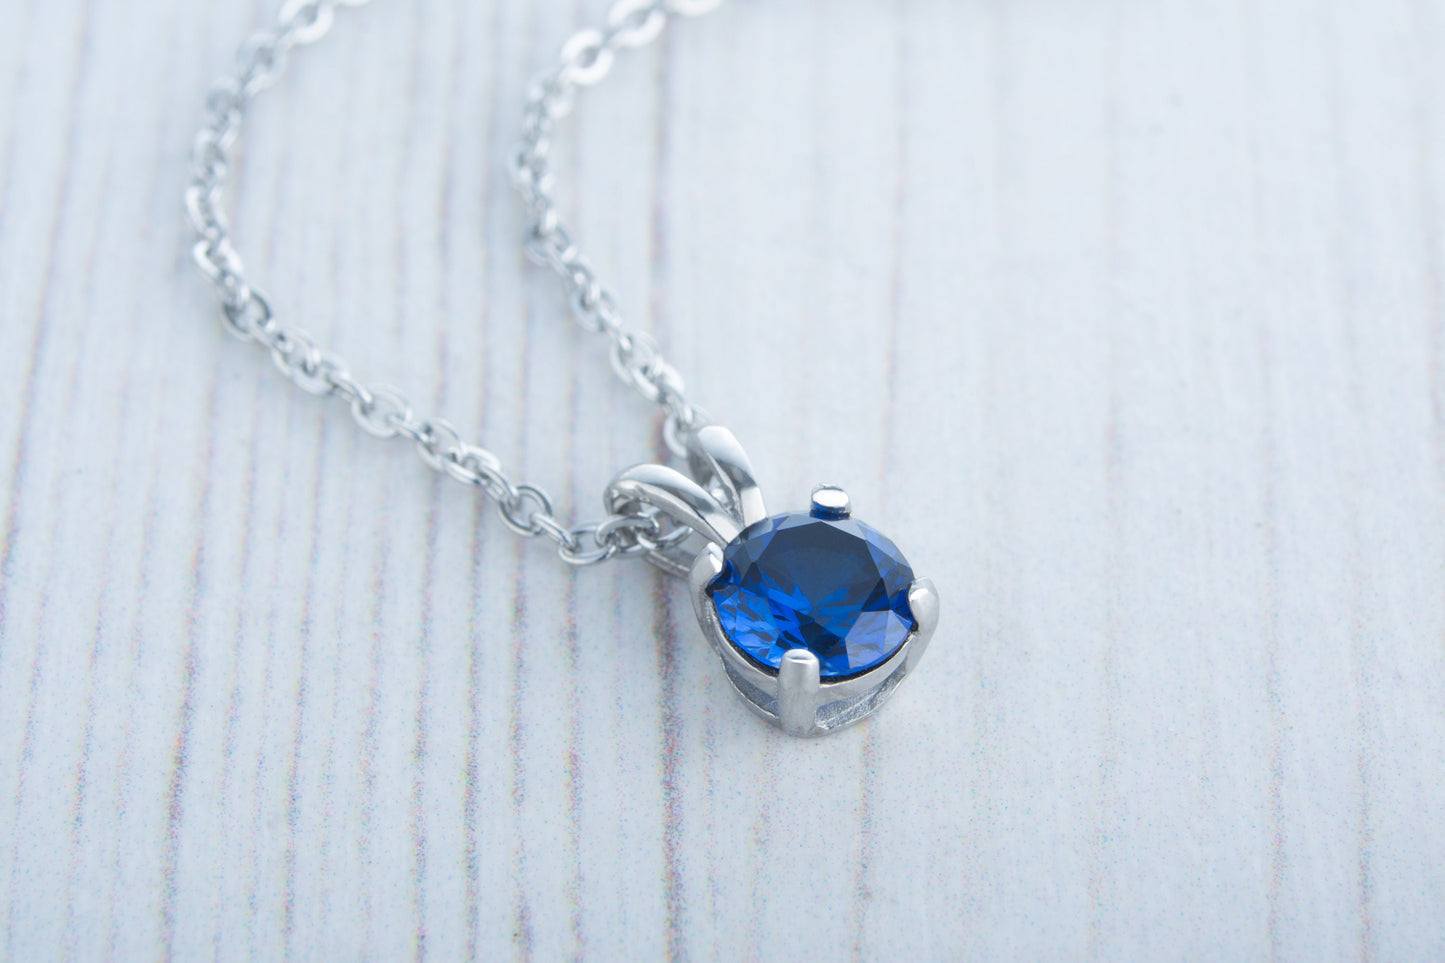 Royal blue sapphire pendant necklace - Available in white gold or titanium